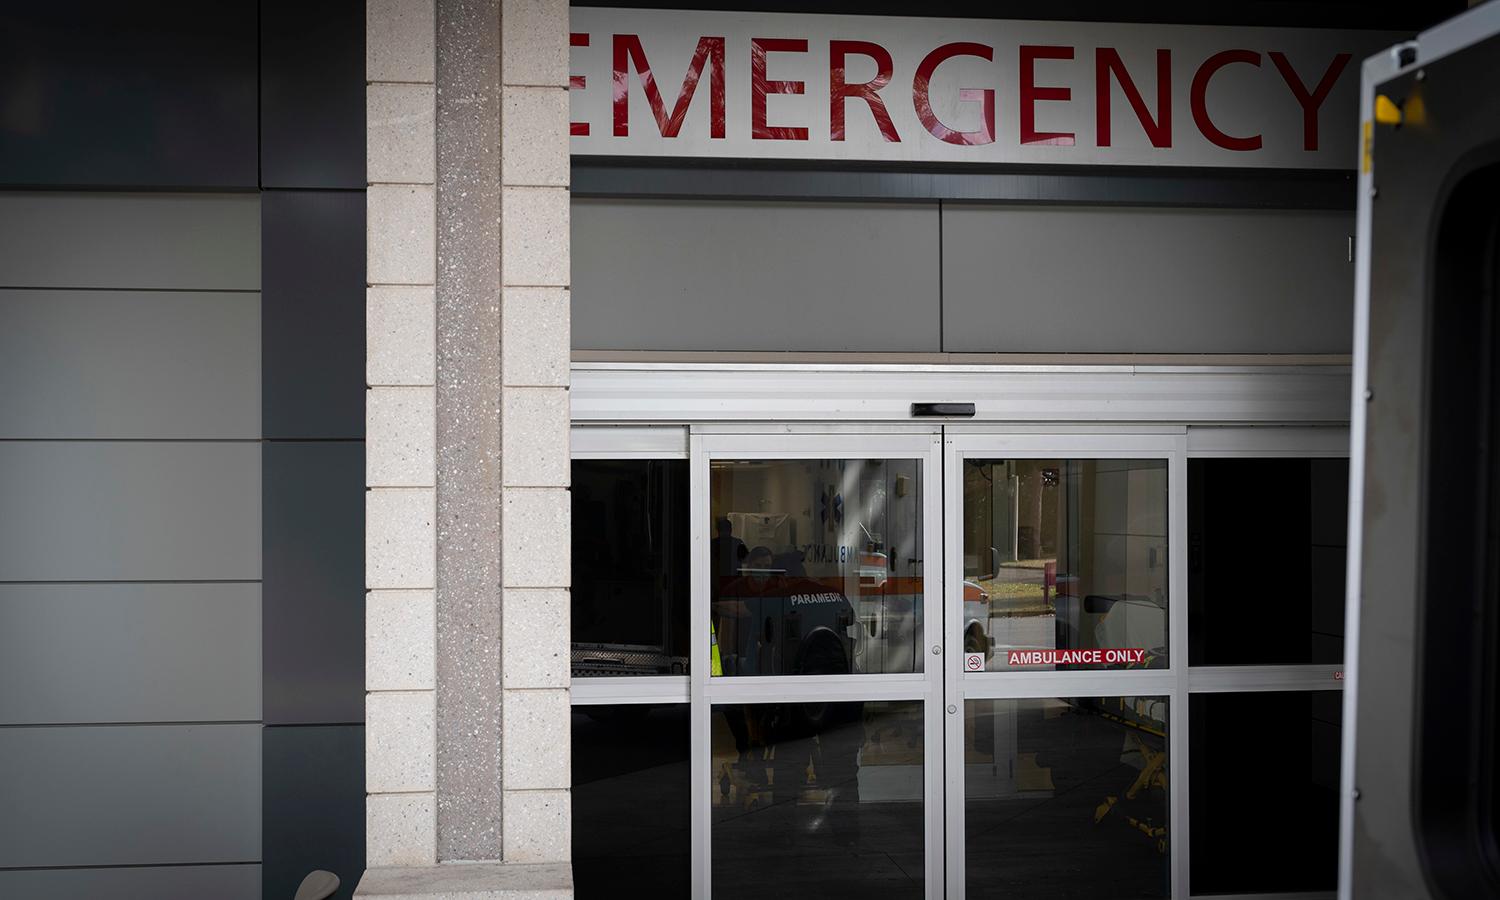 The entrance to a hospital emergency room is seen